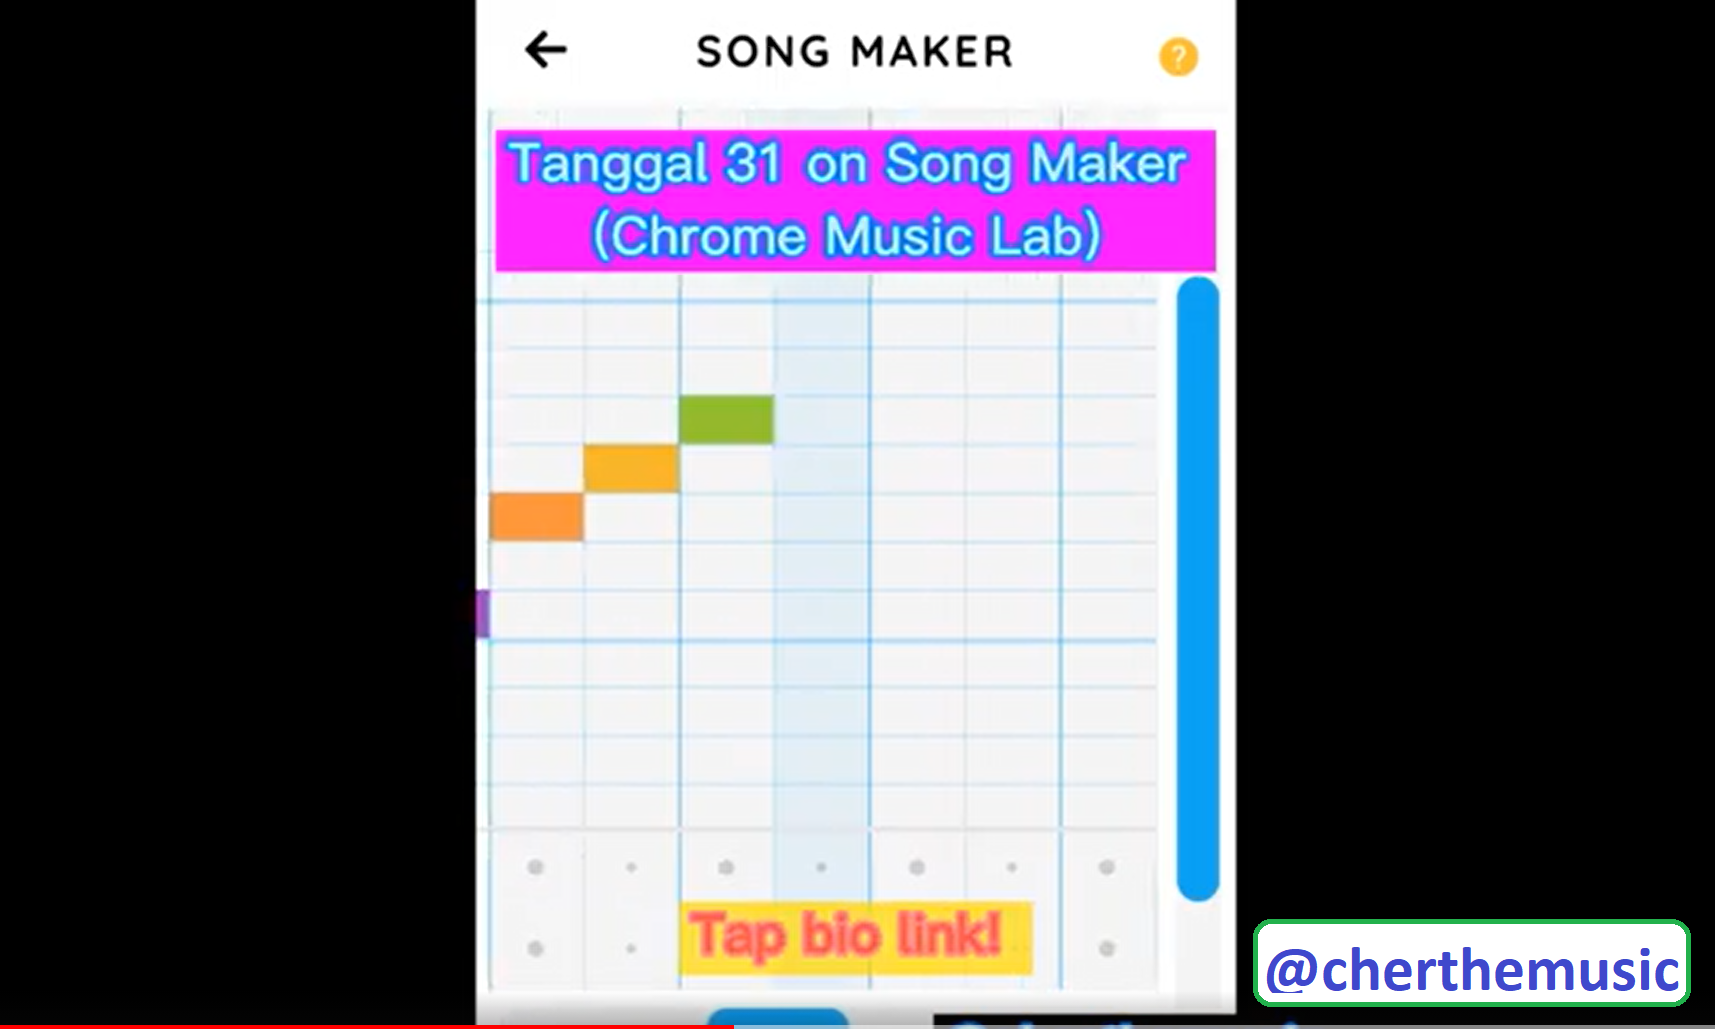 Tanggal 31 on Song Maker by Chrome Music Lab